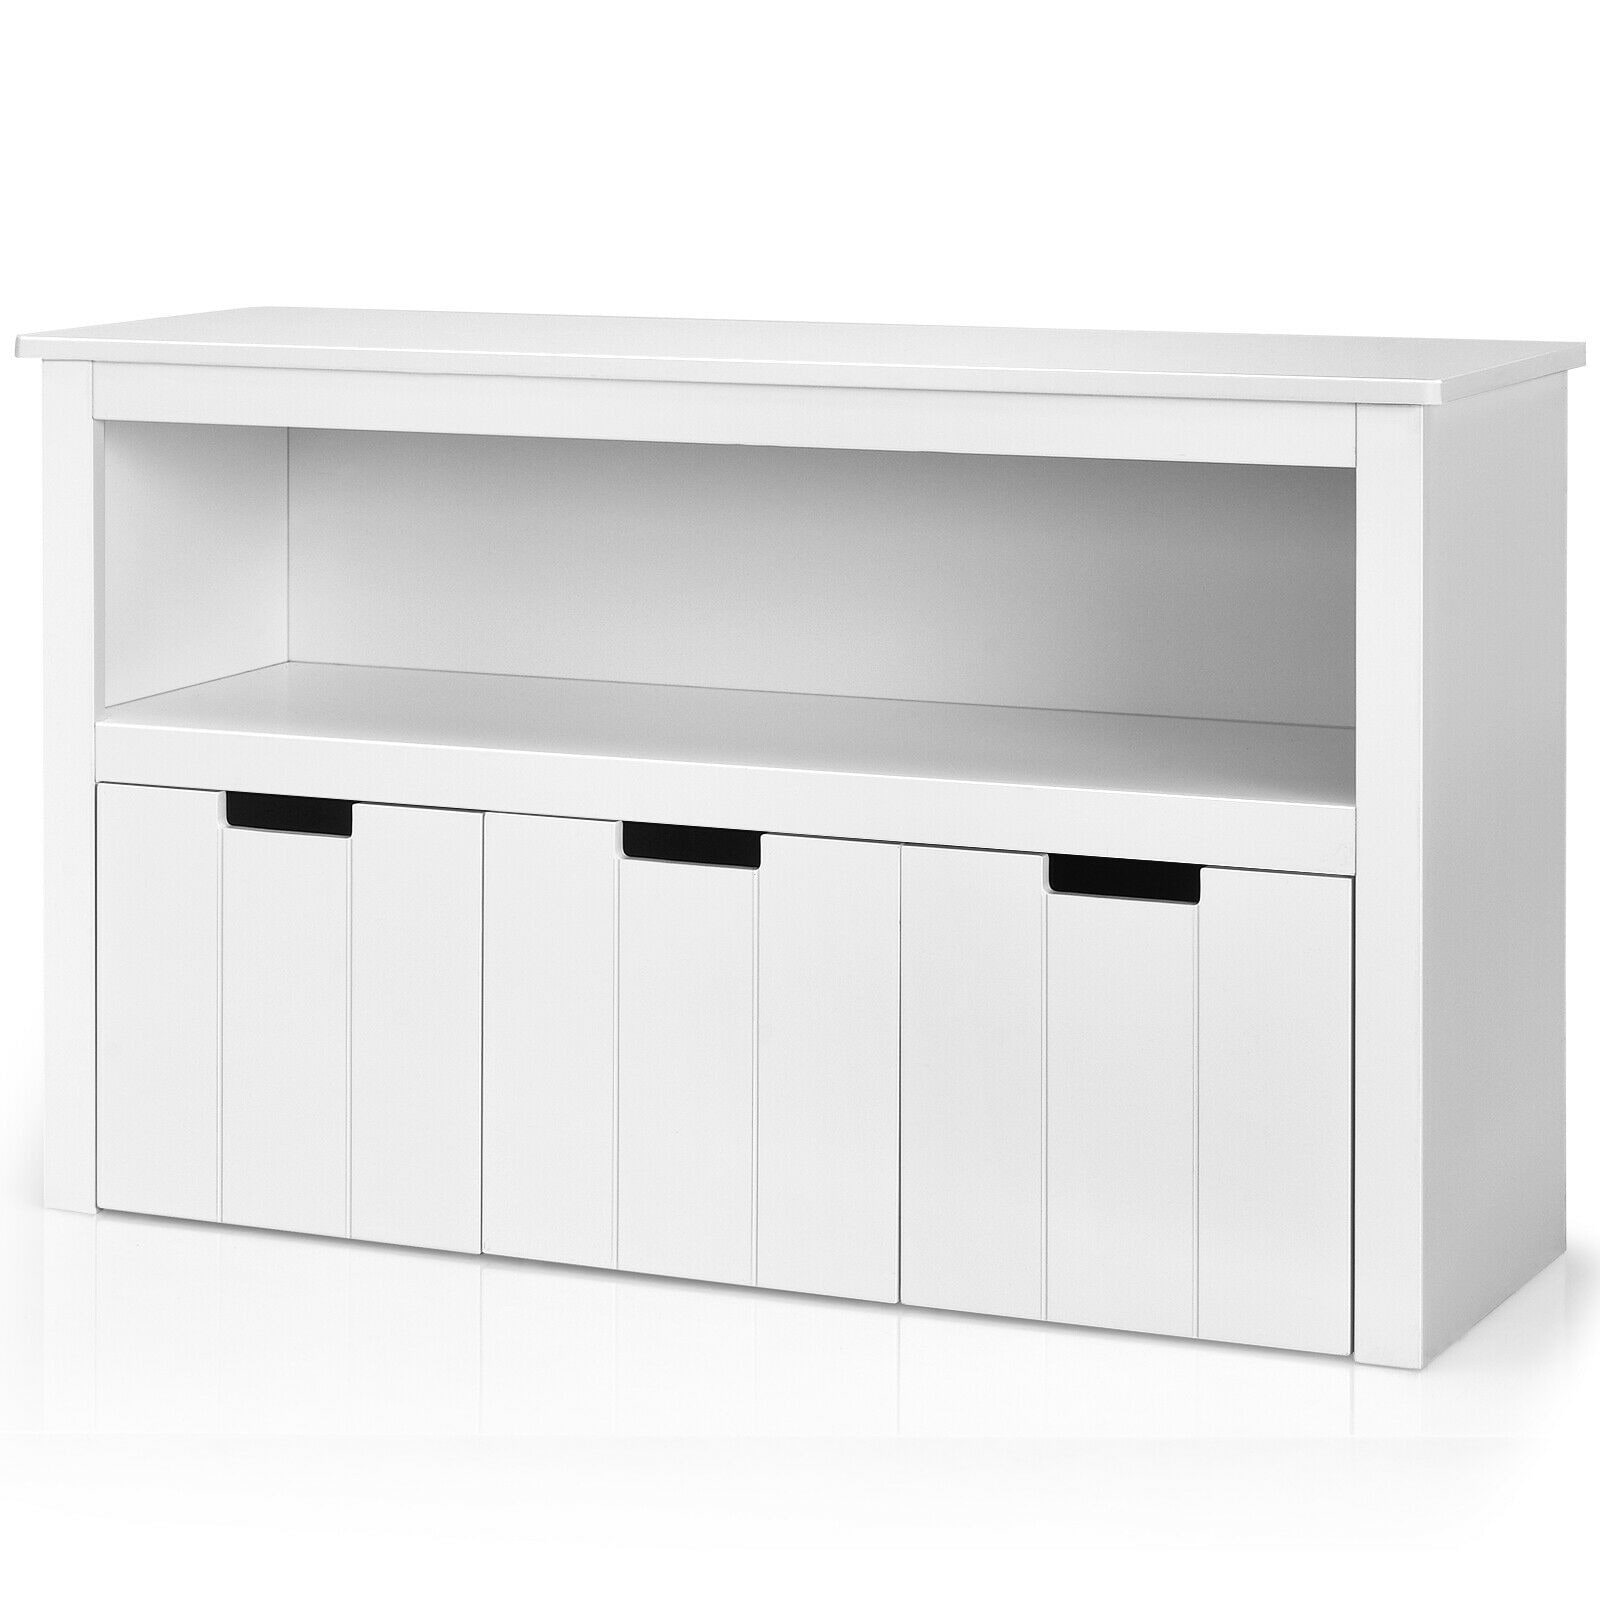 https://ak1.ostkcdn.com/images/products/is/images/direct/96a9a070a4bdaf721ef095fa8355b75895dc0dfc/Kid-Toy-Storage-Cabinet-3-Drawer-Chest-with-Wheels-Large-Storage-Cube-Shelf.jpg